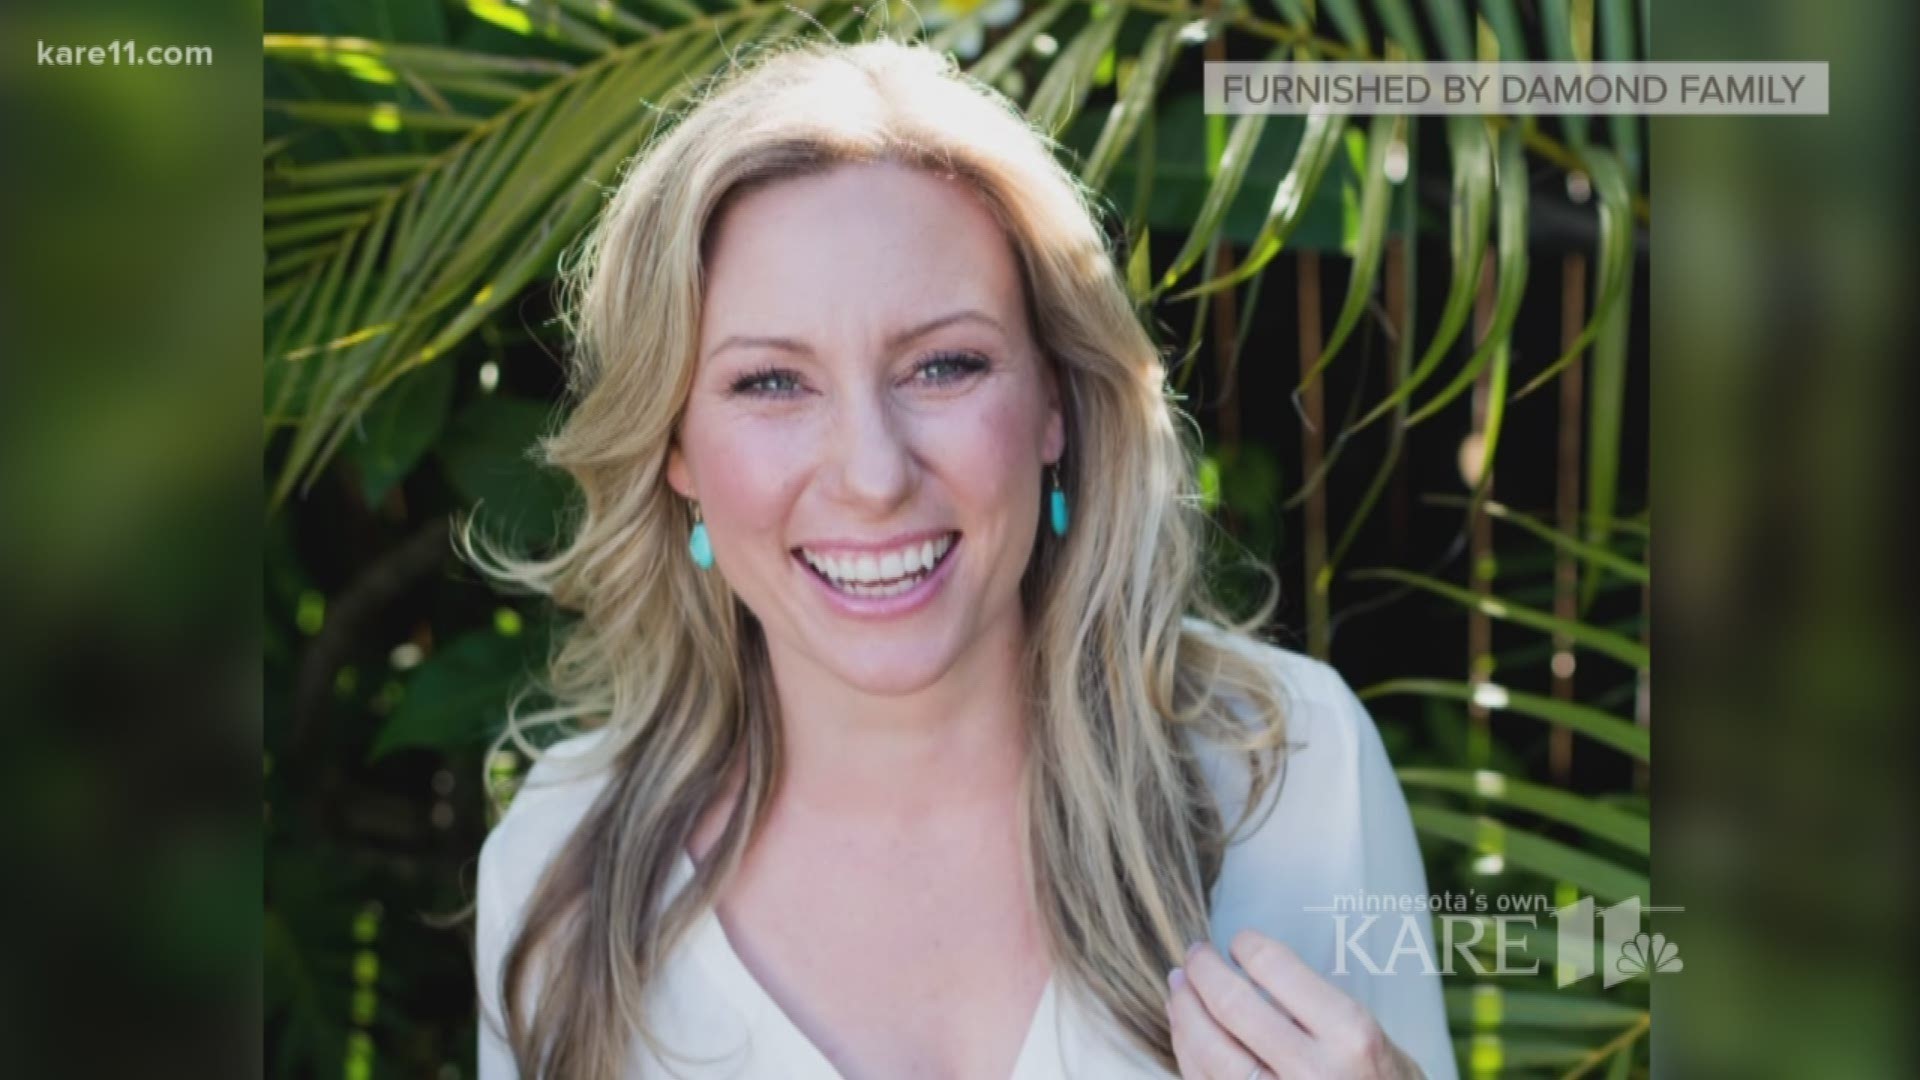 Hennepin County Attorney Mike Freeman on Tuesday announced murder charges against Police Officer Mohamed Noor, saying there is no evidence Noor encountered any kind of threat before fatally shooting popular community leader Justine Damond. http://kare11.t